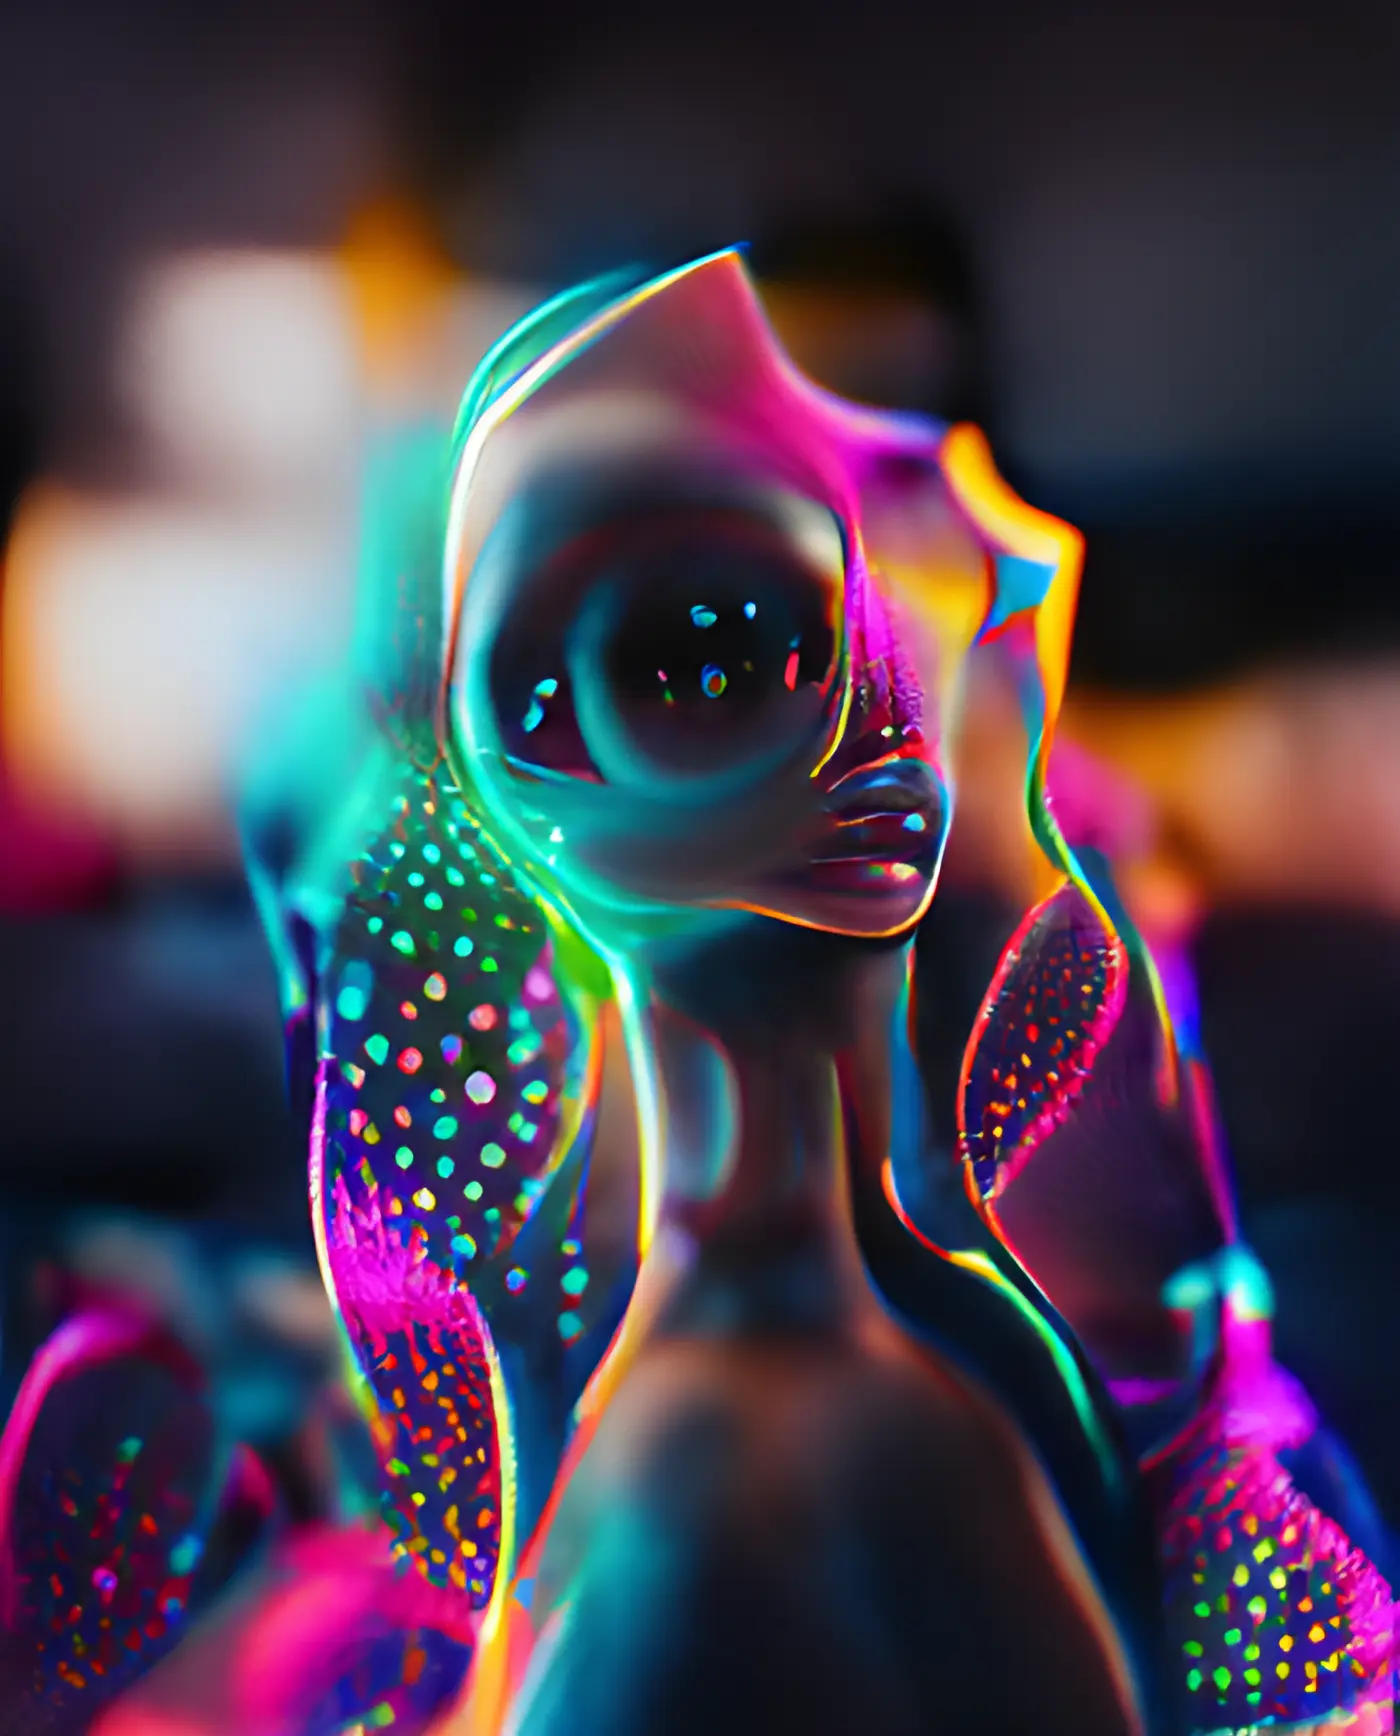 The alien in the psychedelic cloak